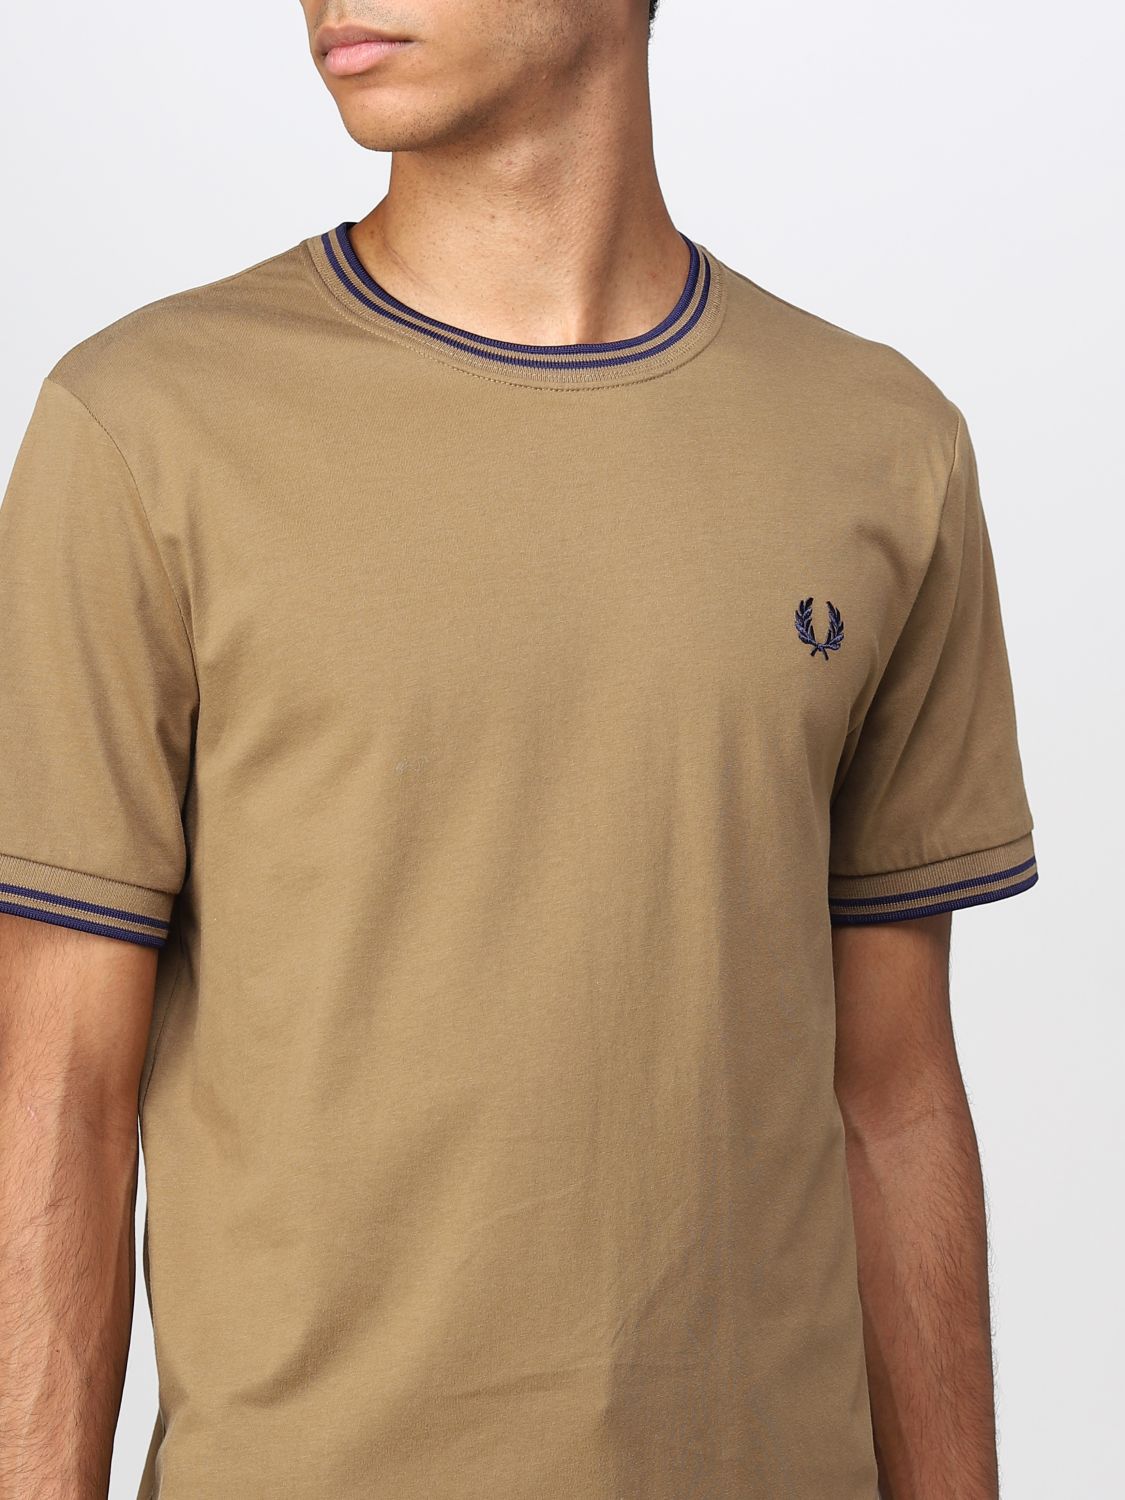 T-Shirt Fred Perry: Fred Perry Herren T-Shirt braun 3